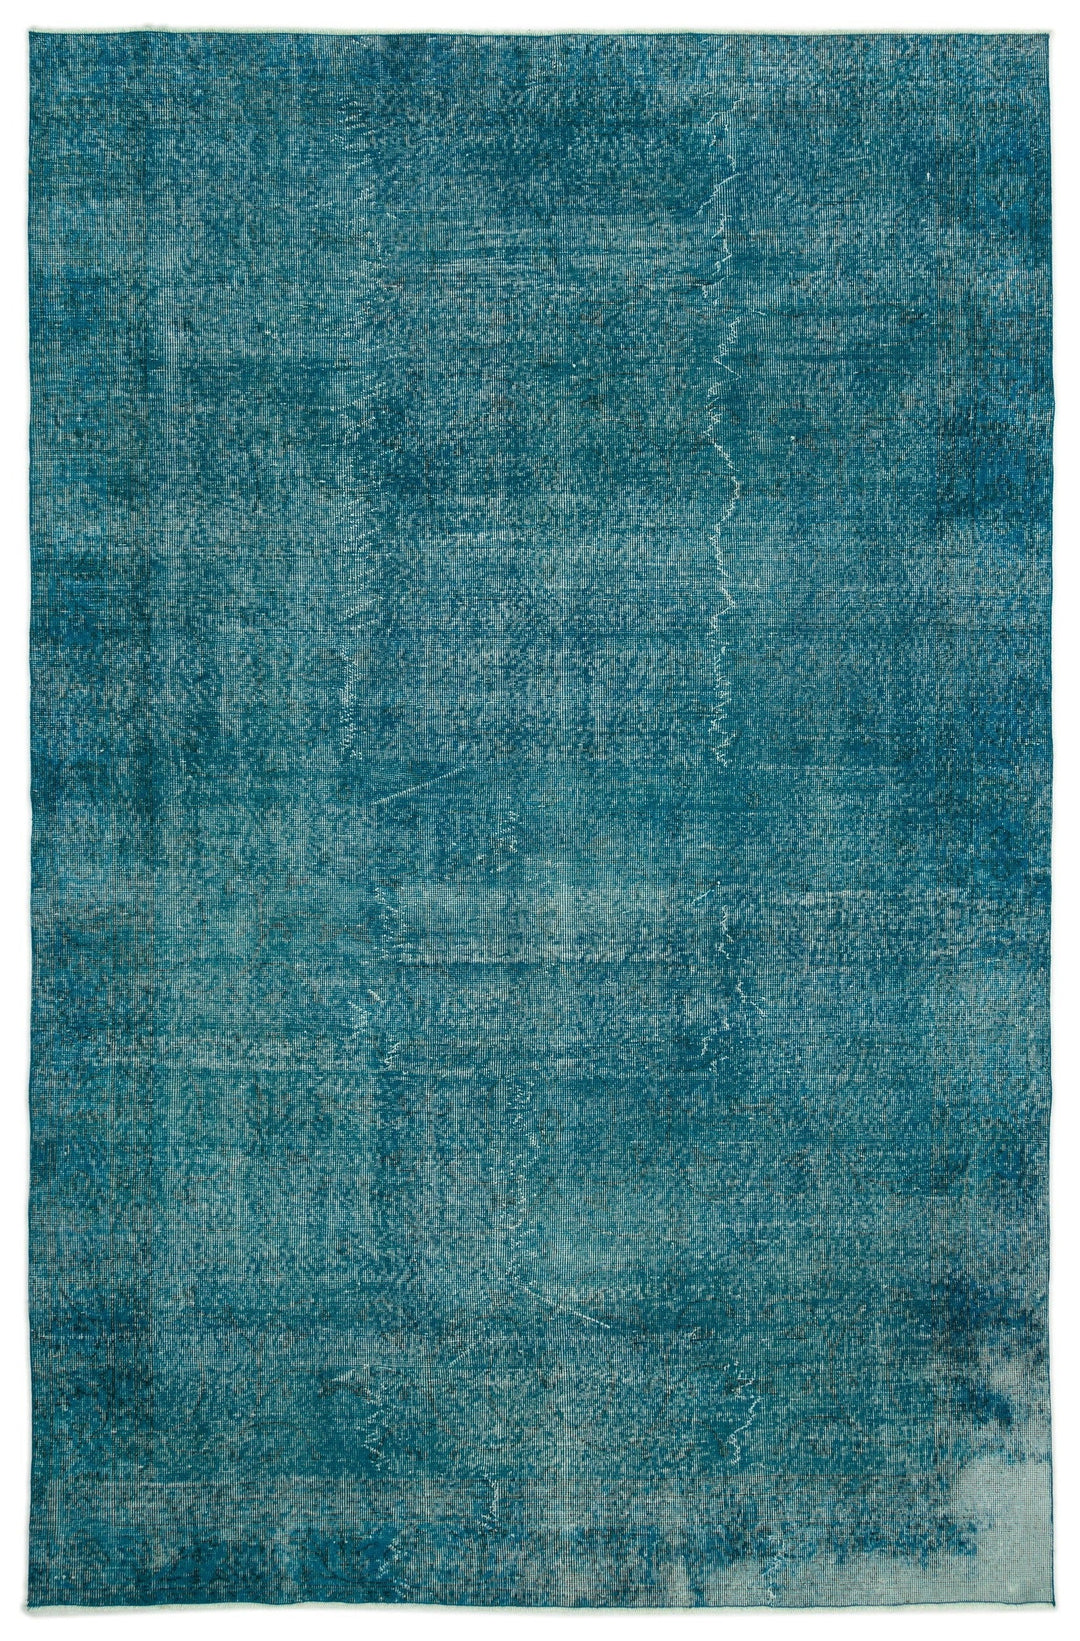 Athens Turquoise Tumbled Wool Hand Woven Carpet 195 x 295